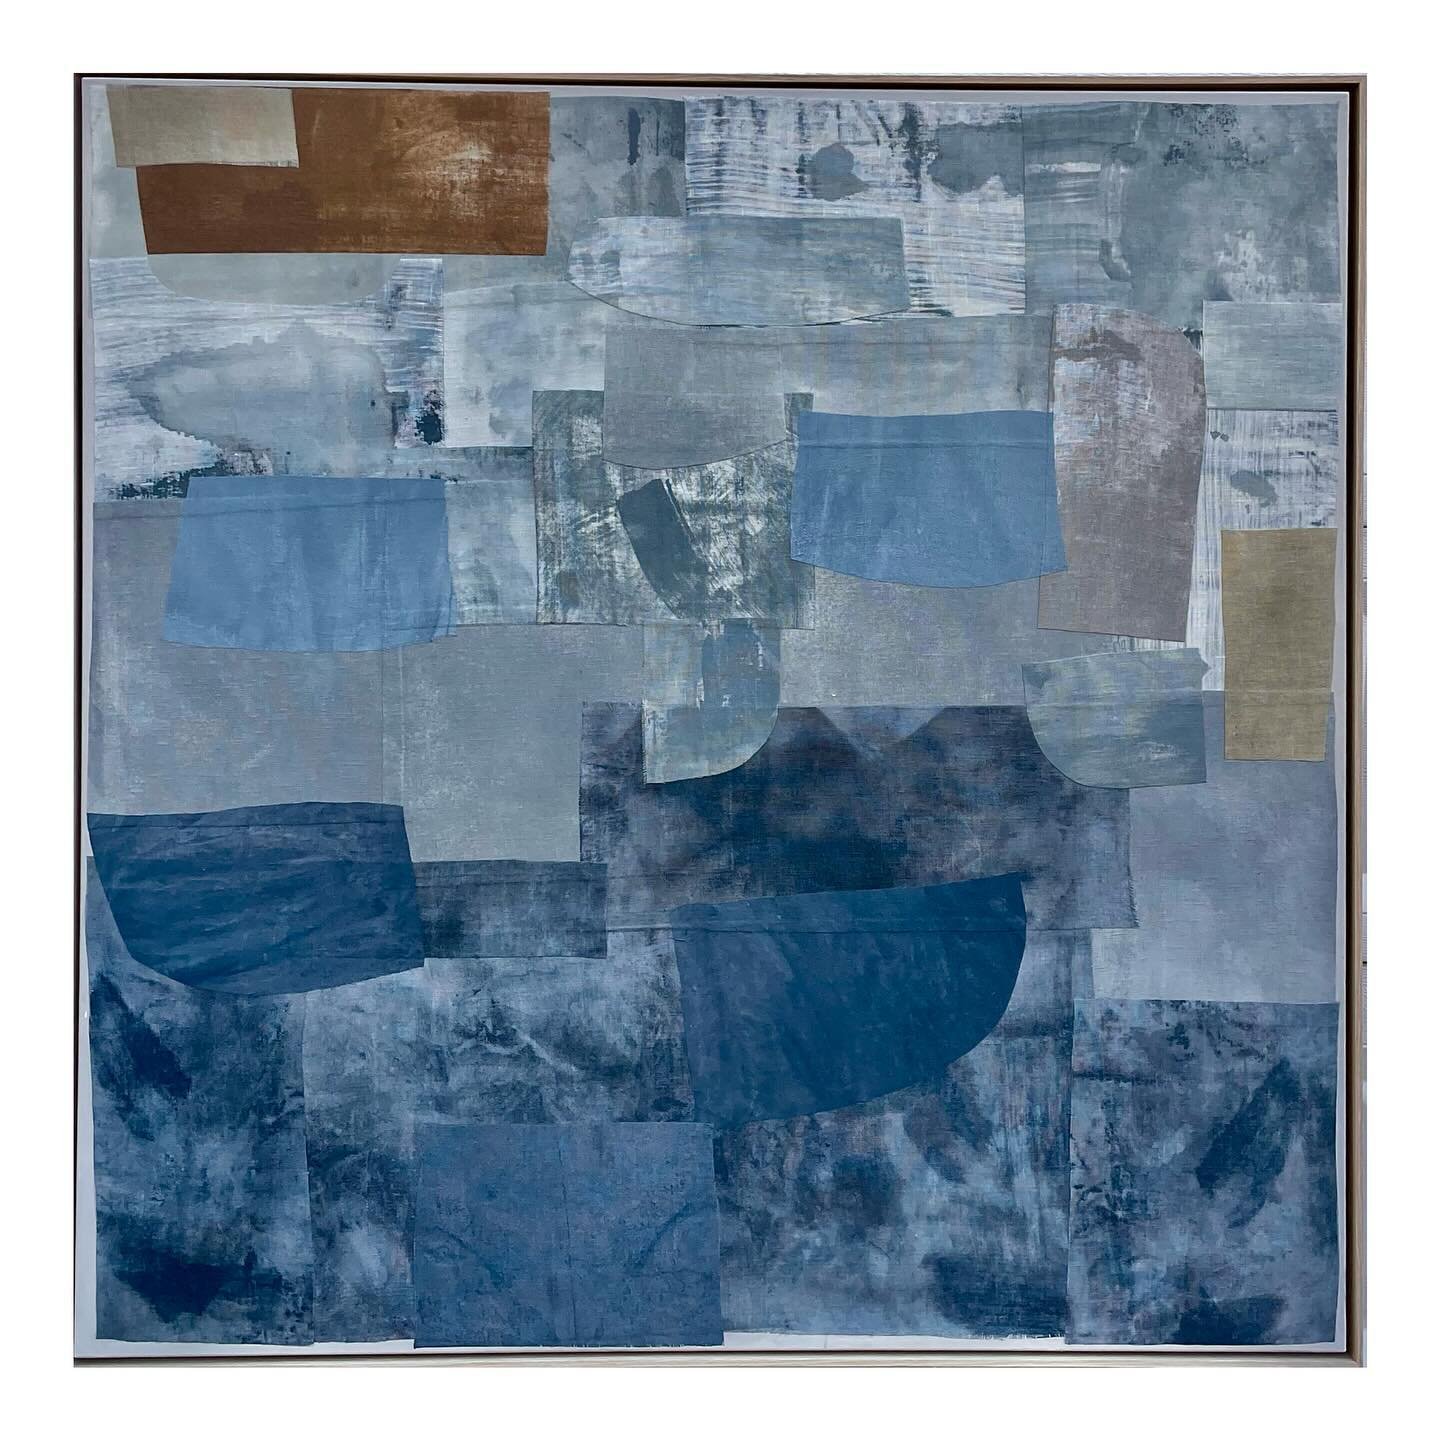 Available @designsupplyshop &lsquo;Hooloovoo&rsquo;-49x49 finished framed size .
Hand dyed linen collage , framed in natural wood.
Shades of #hagueblue #parmagray #skylight
#jennifergibbsart
#collagemyworld